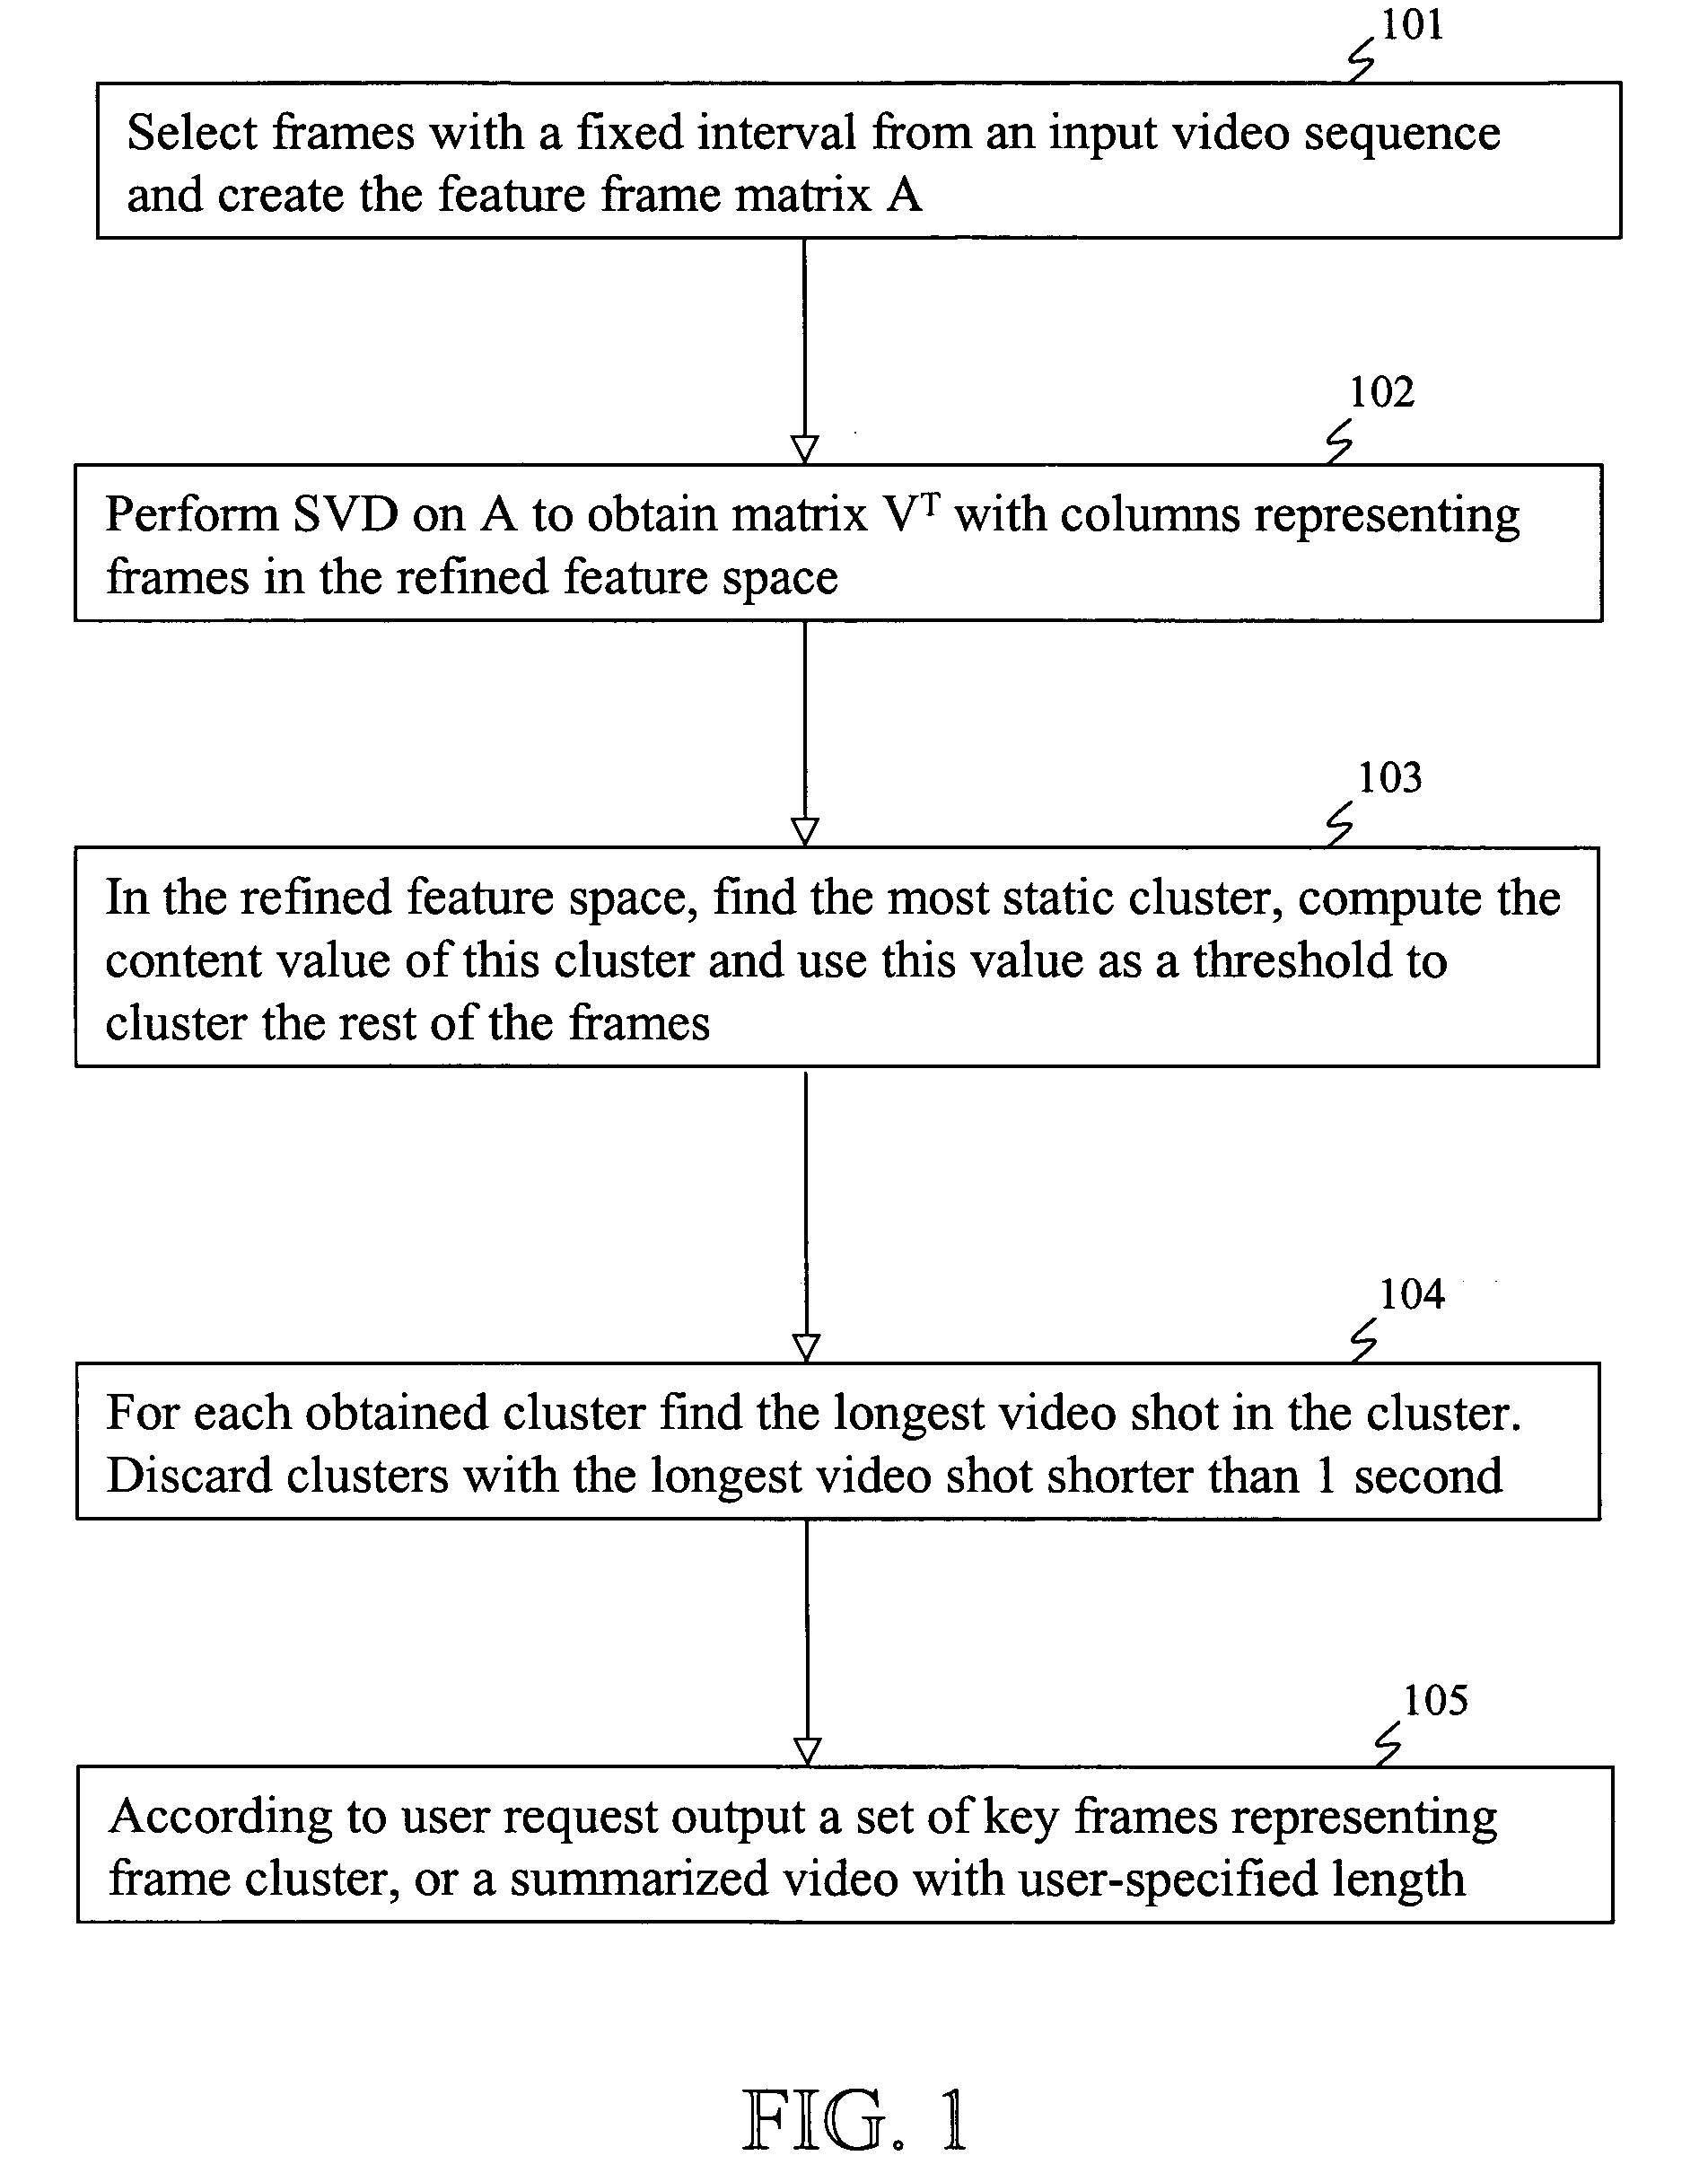 Method and system for segmentation, classification, and summarization of video images